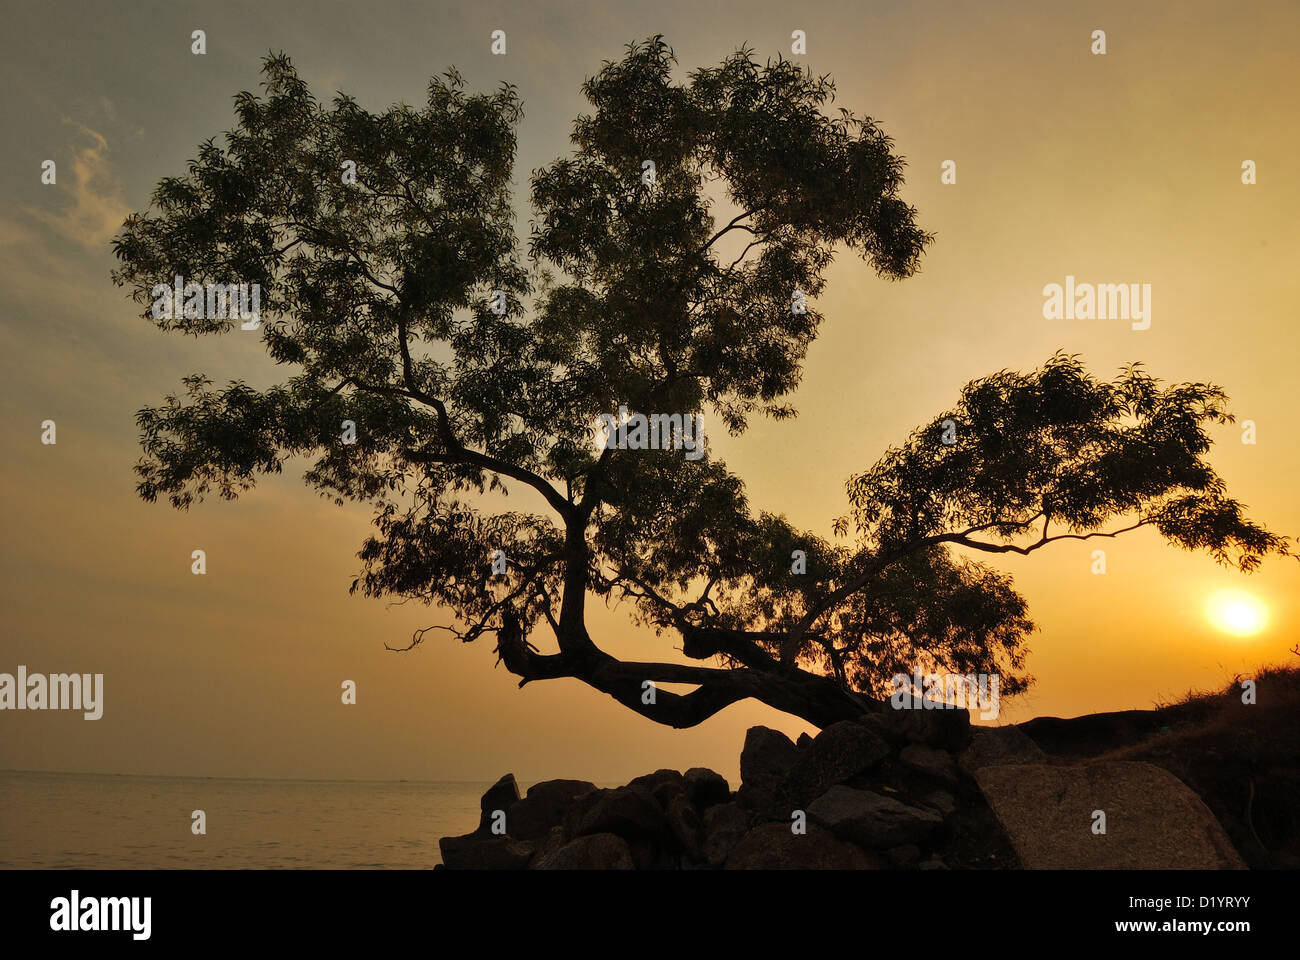 Morning view of sea side photography by an old aged tree as sunrise from the background creating a silhouette effect. Stock Photo